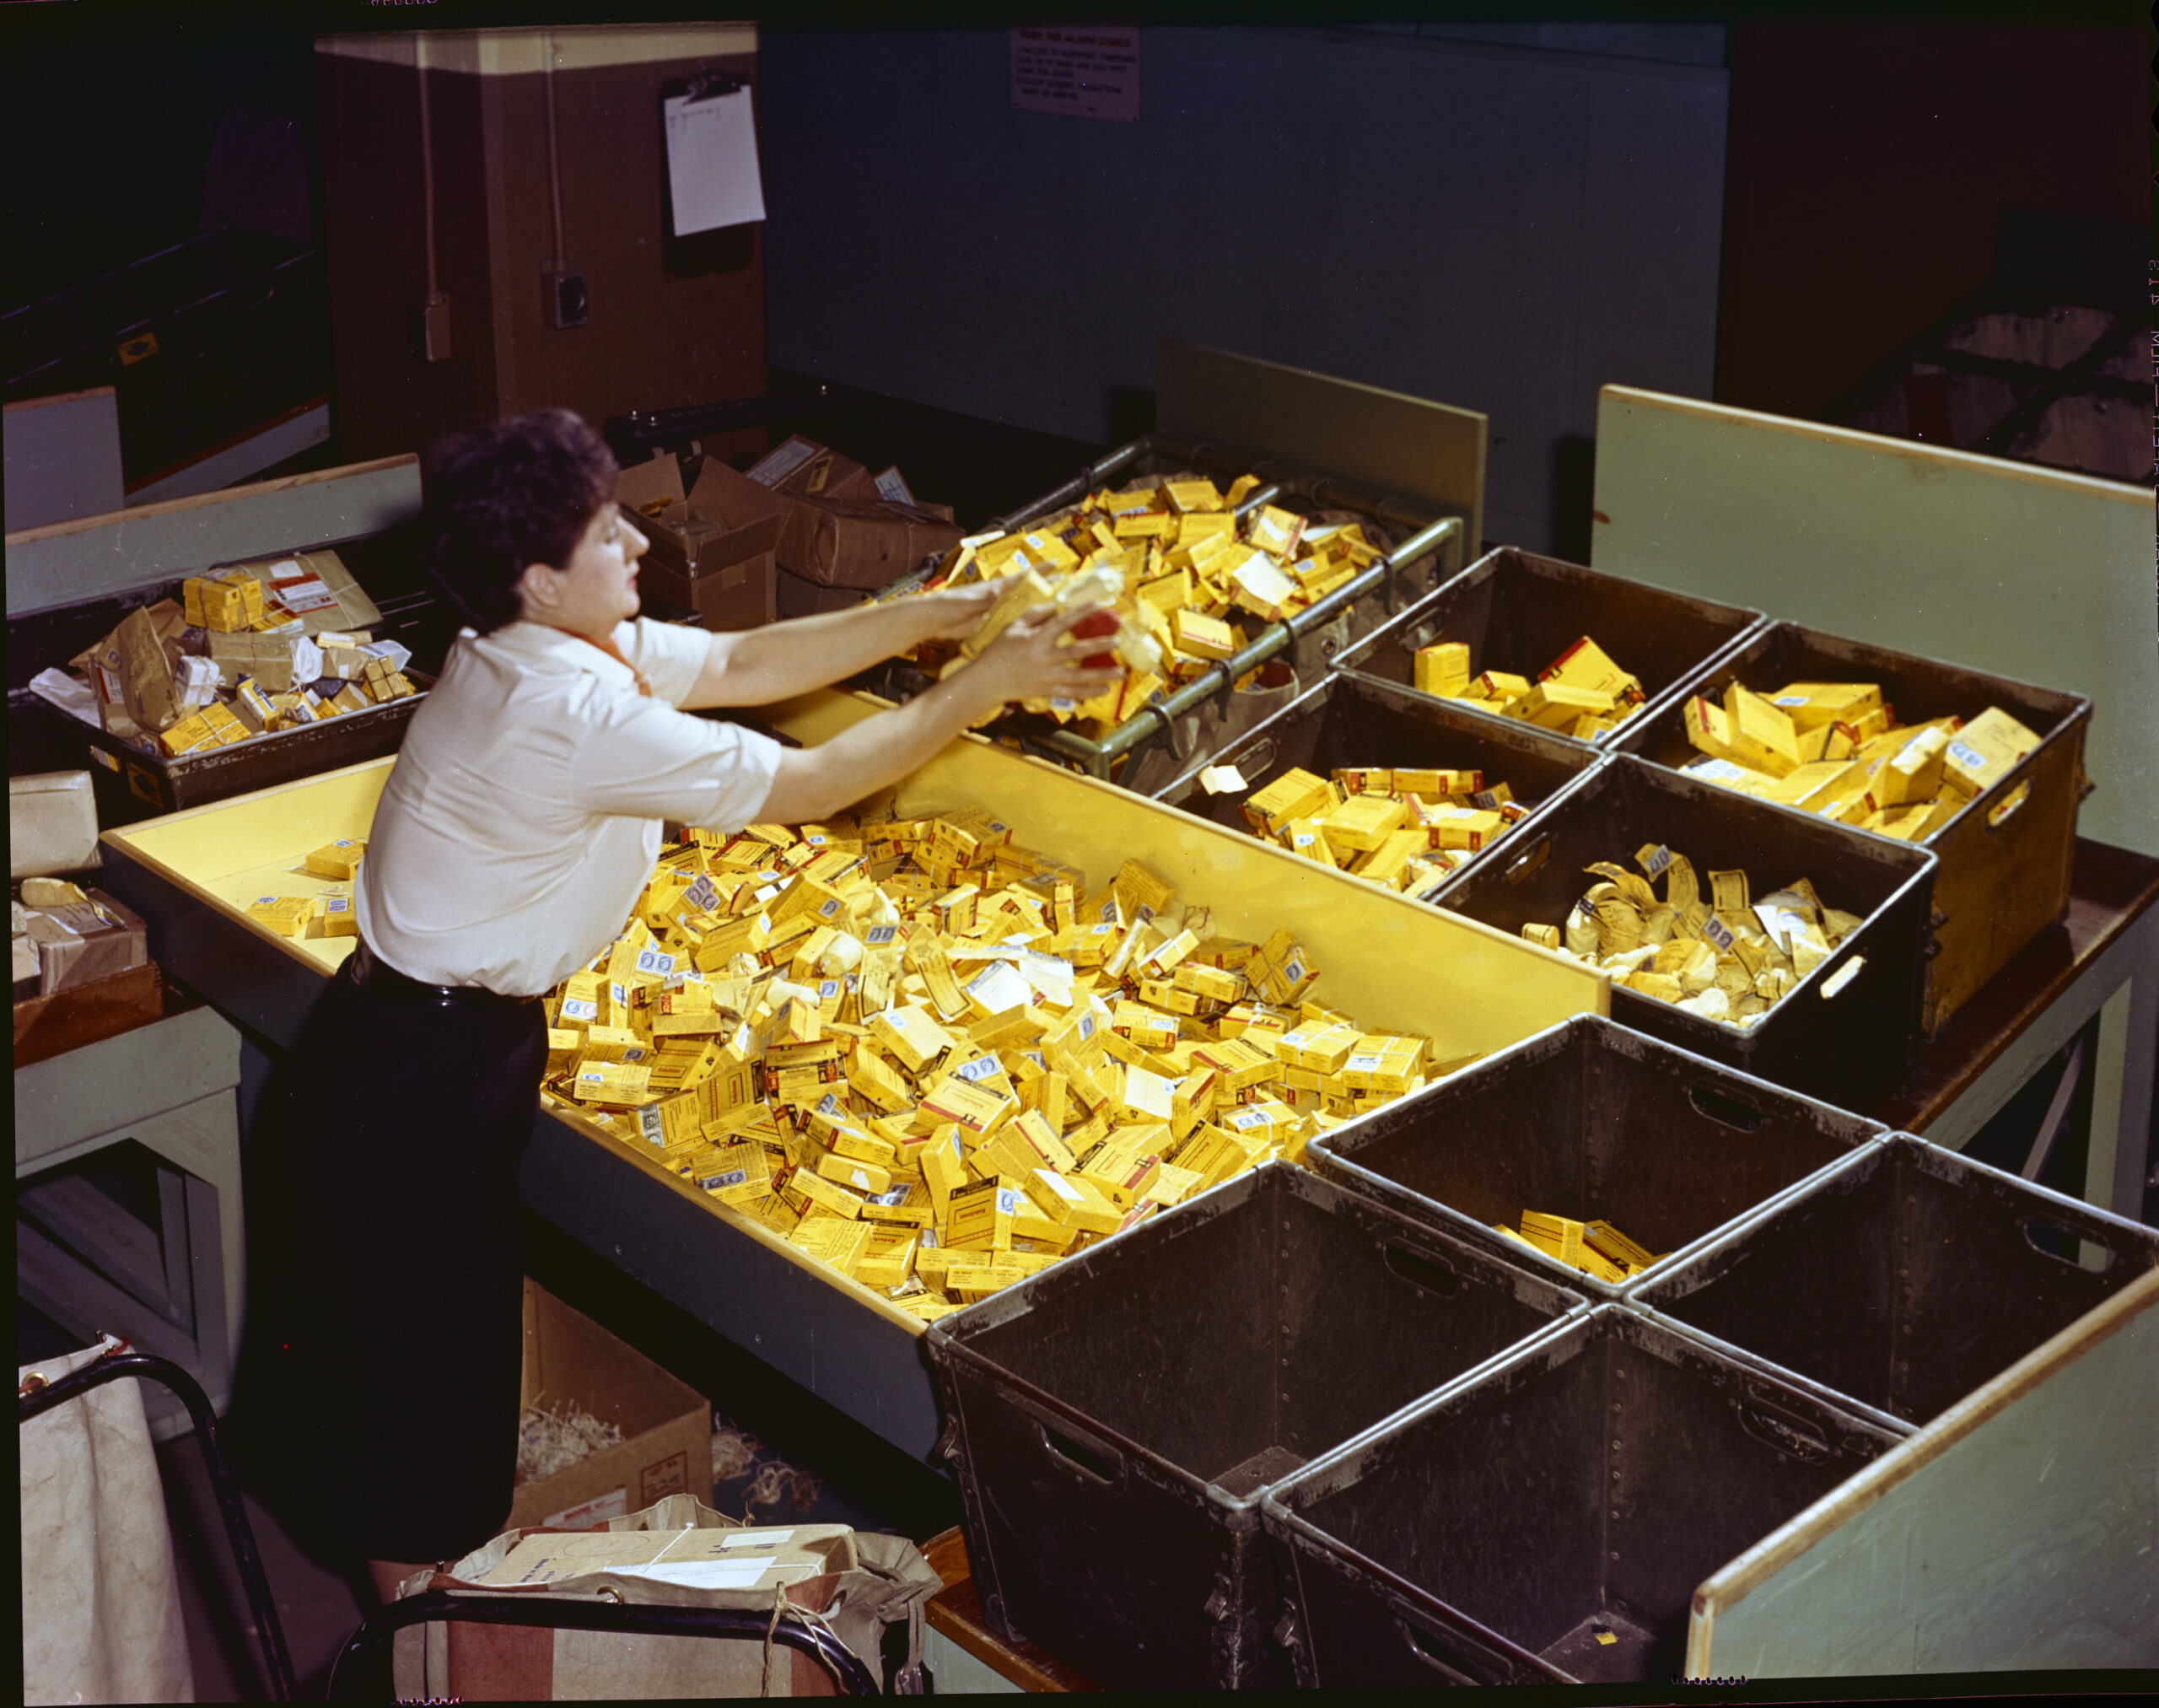 [Unknown Photographer], Kodachrome Motion Picture Intake, Kodak Canada, Vancouver, c.1965. Image from The Kodak Canada Corporate Archive, courtesy of Toronto Metropolitan University Library, Archives and Special Collections